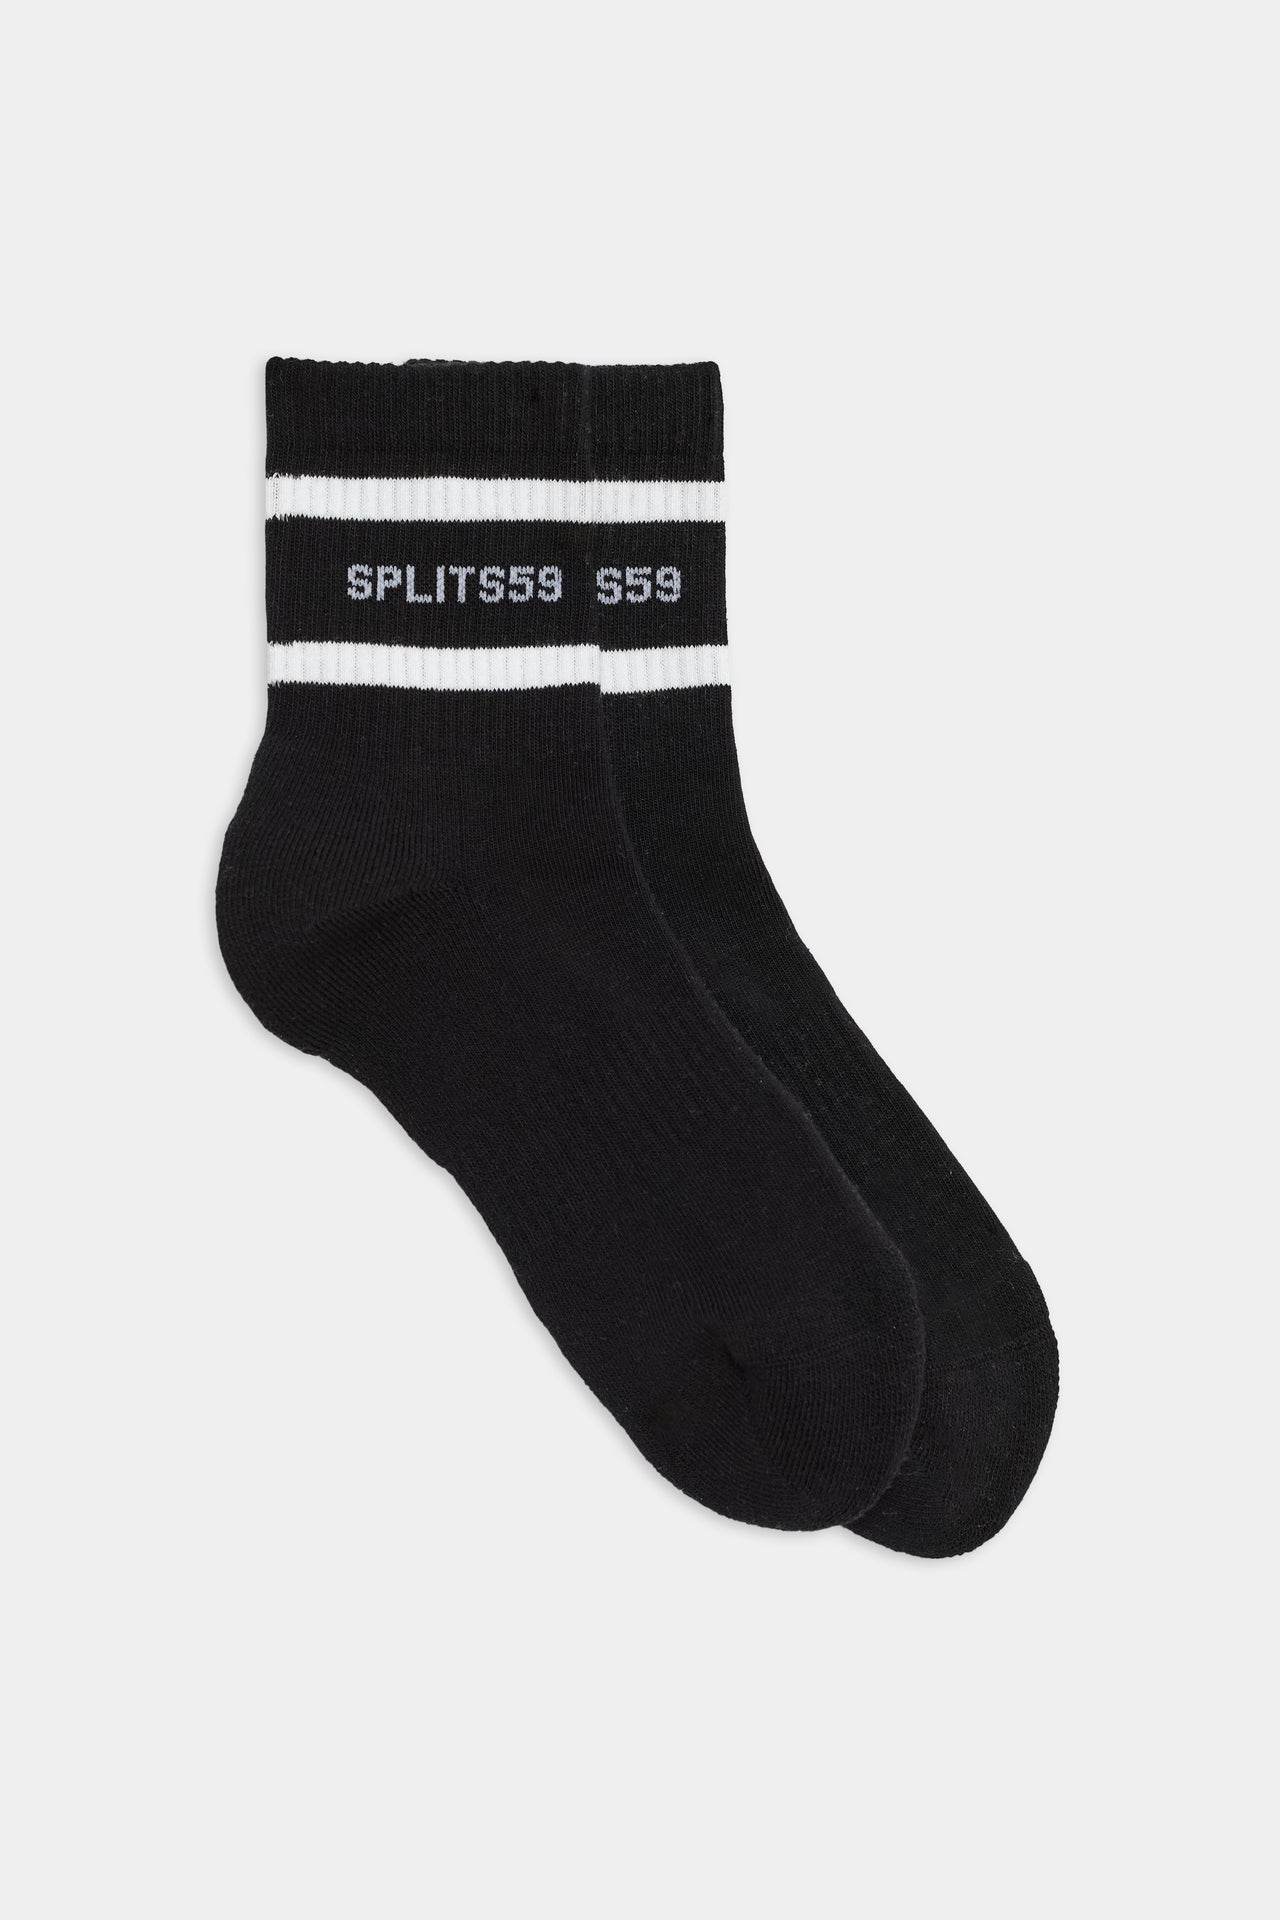 A pair of SPLITS59 Logo Stripe Quarter Socks in black with white bands and the text 